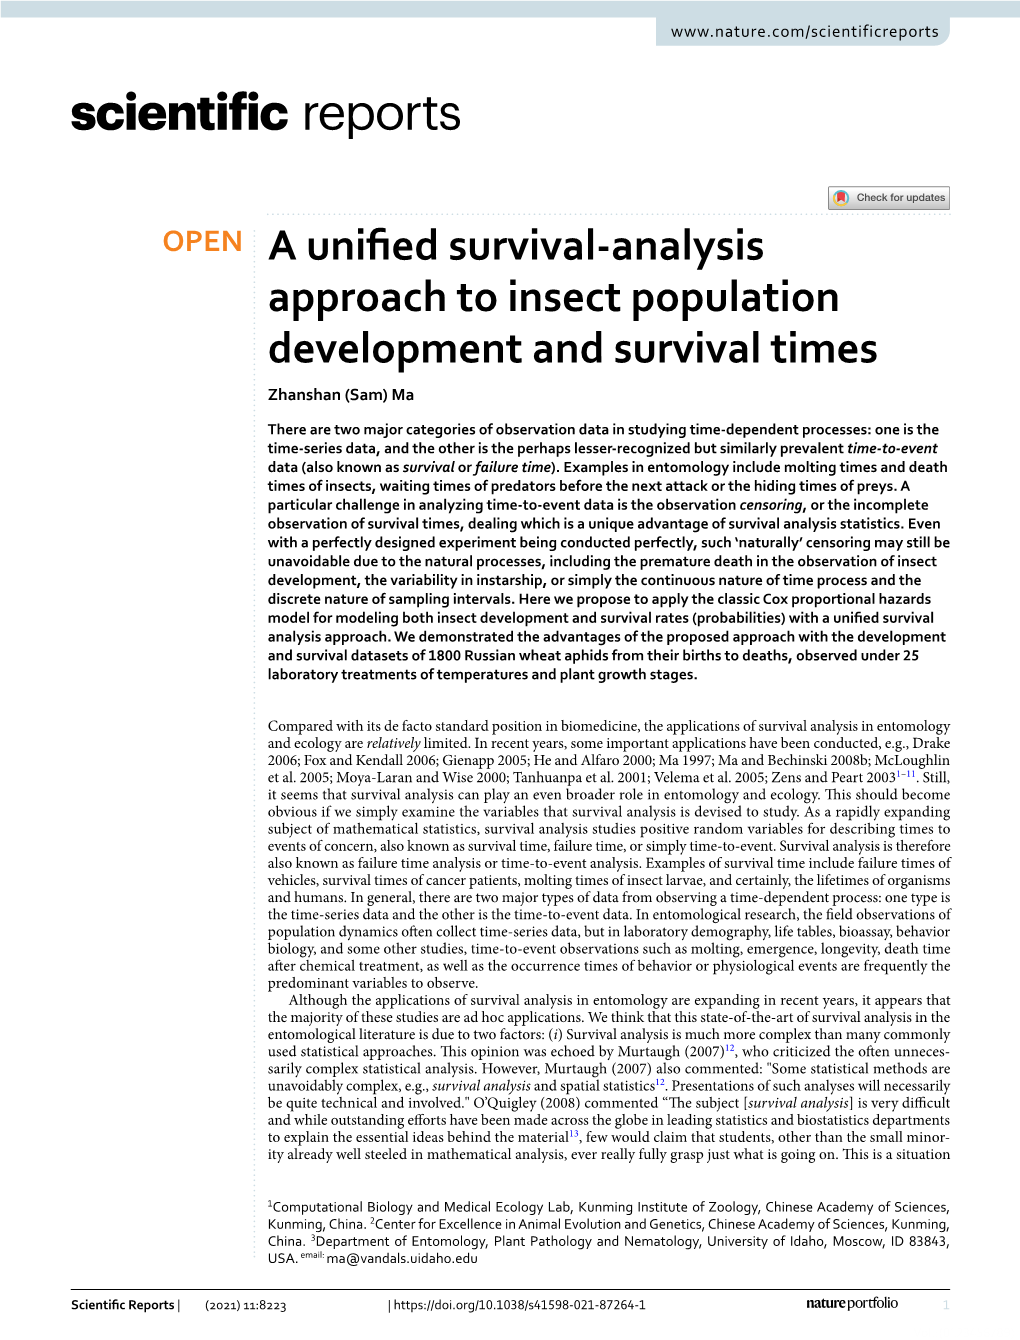 A Unified Survival-Analysis Approach to Insect Population Development